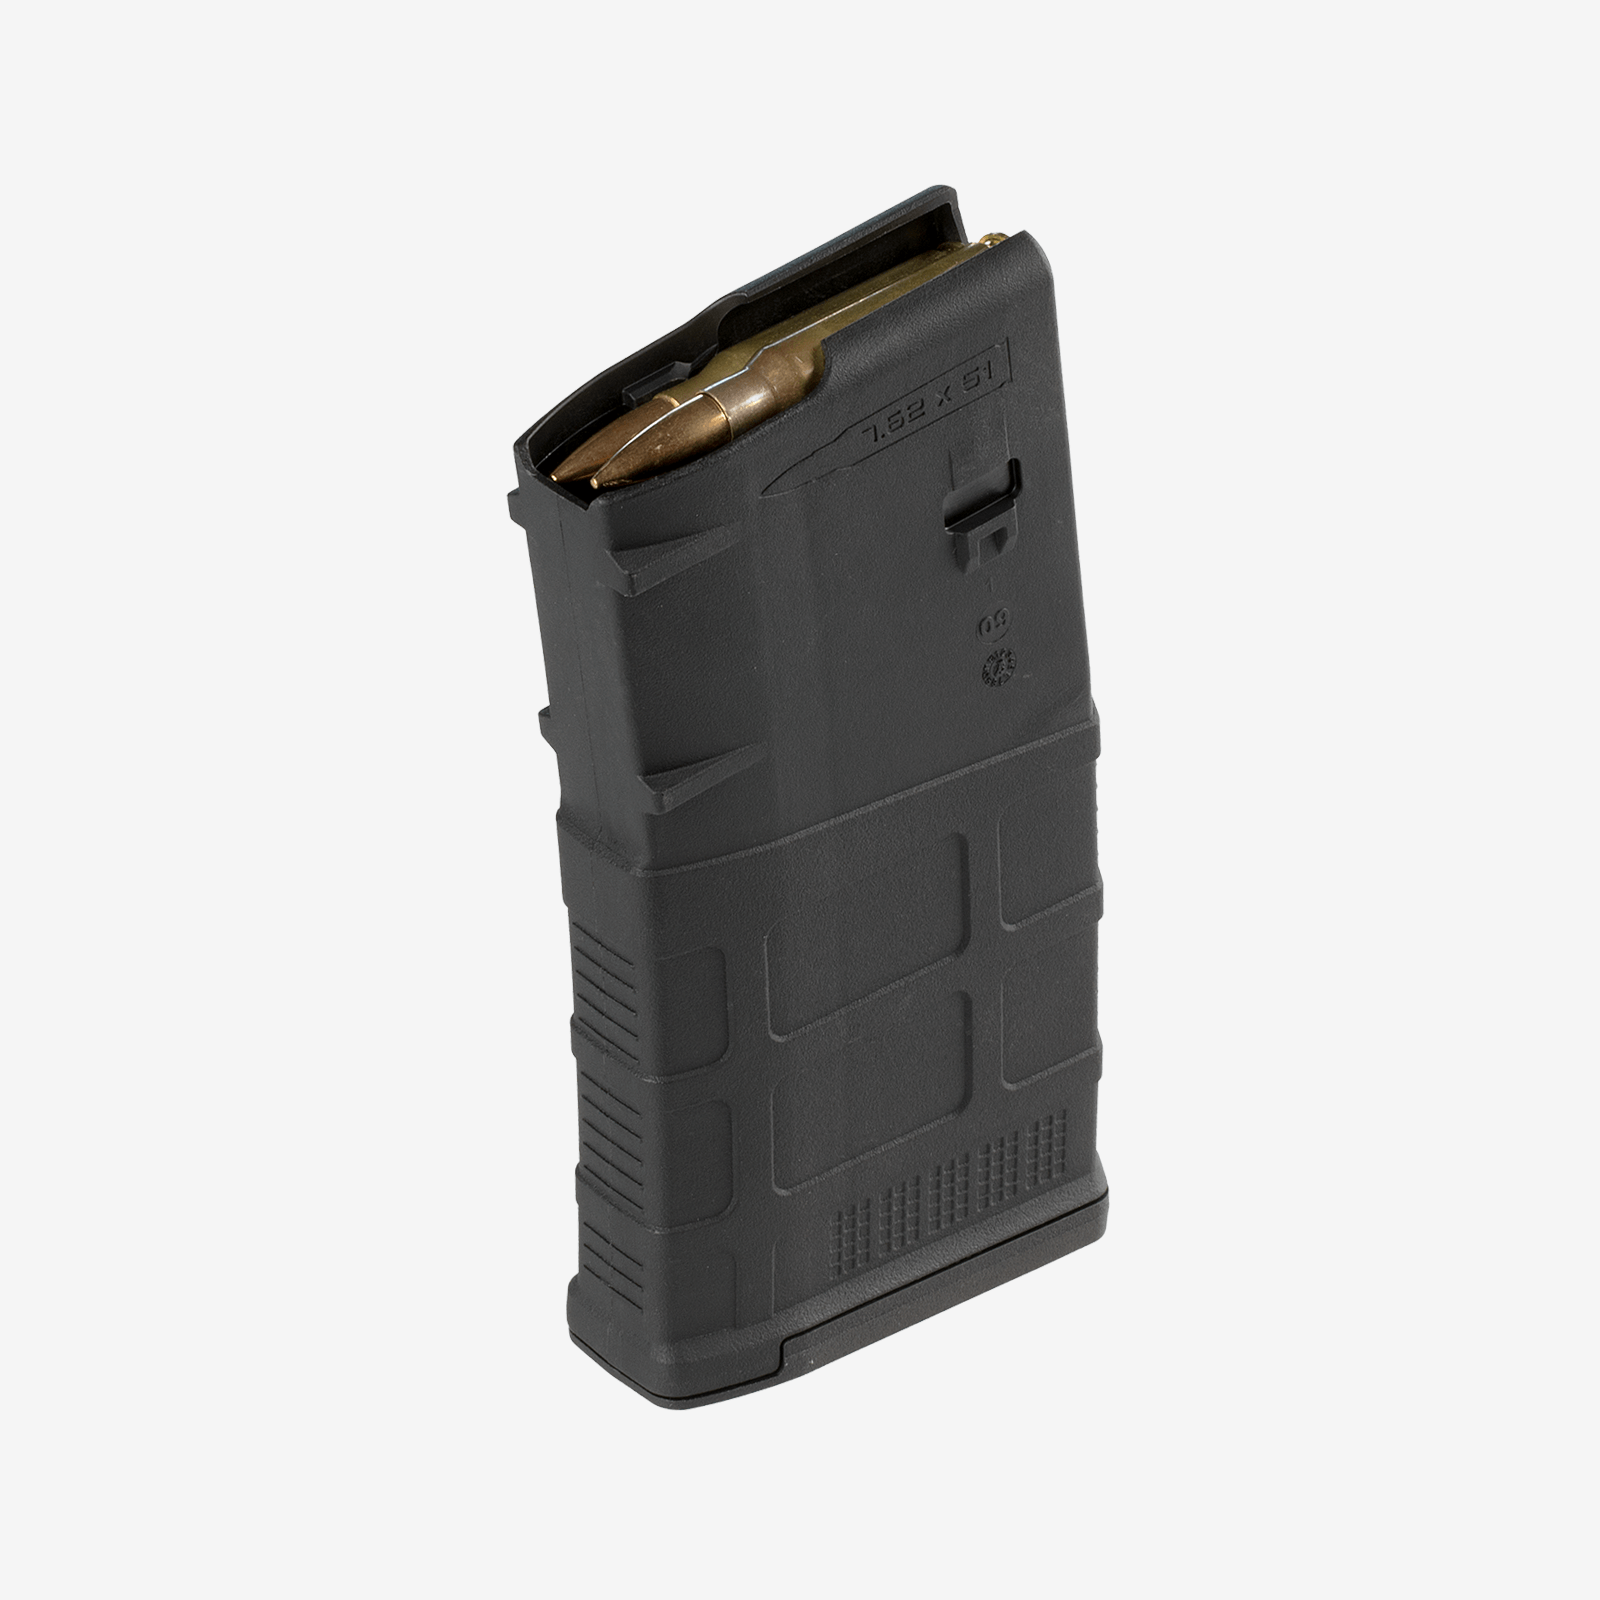 The Magpul 20RD Black AR10 PMAG rifle magazine holds 20 .308 Winchester or 7.62x51mm NATO cartridges for use with AR-10 rifles.